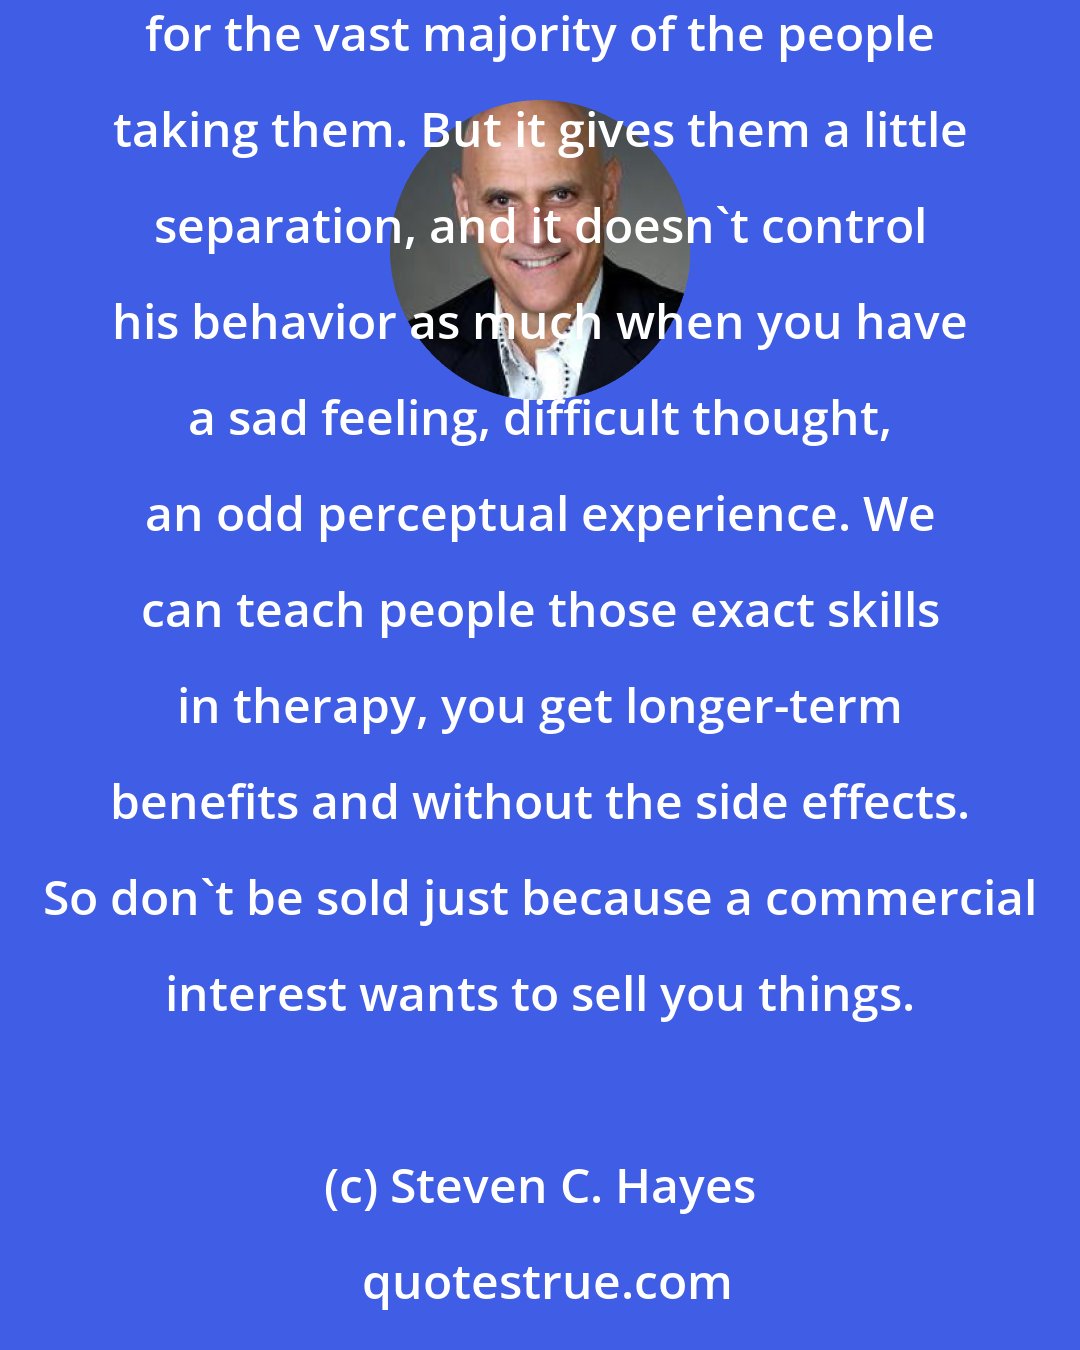 Steven C. Hayes: Antidepressant medications, you still have some depressive thoughts. Antipsychotic medications, you still have some psychotic symptoms for the vast majority of the people taking them. But it gives them a little separation, and it doesn't control his behavior as much when you have a sad feeling, difficult thought, an odd perceptual experience. We can teach people those exact skills in therapy, you get longer-term benefits and without the side effects. So don't be sold just because a commercial interest wants to sell you things.